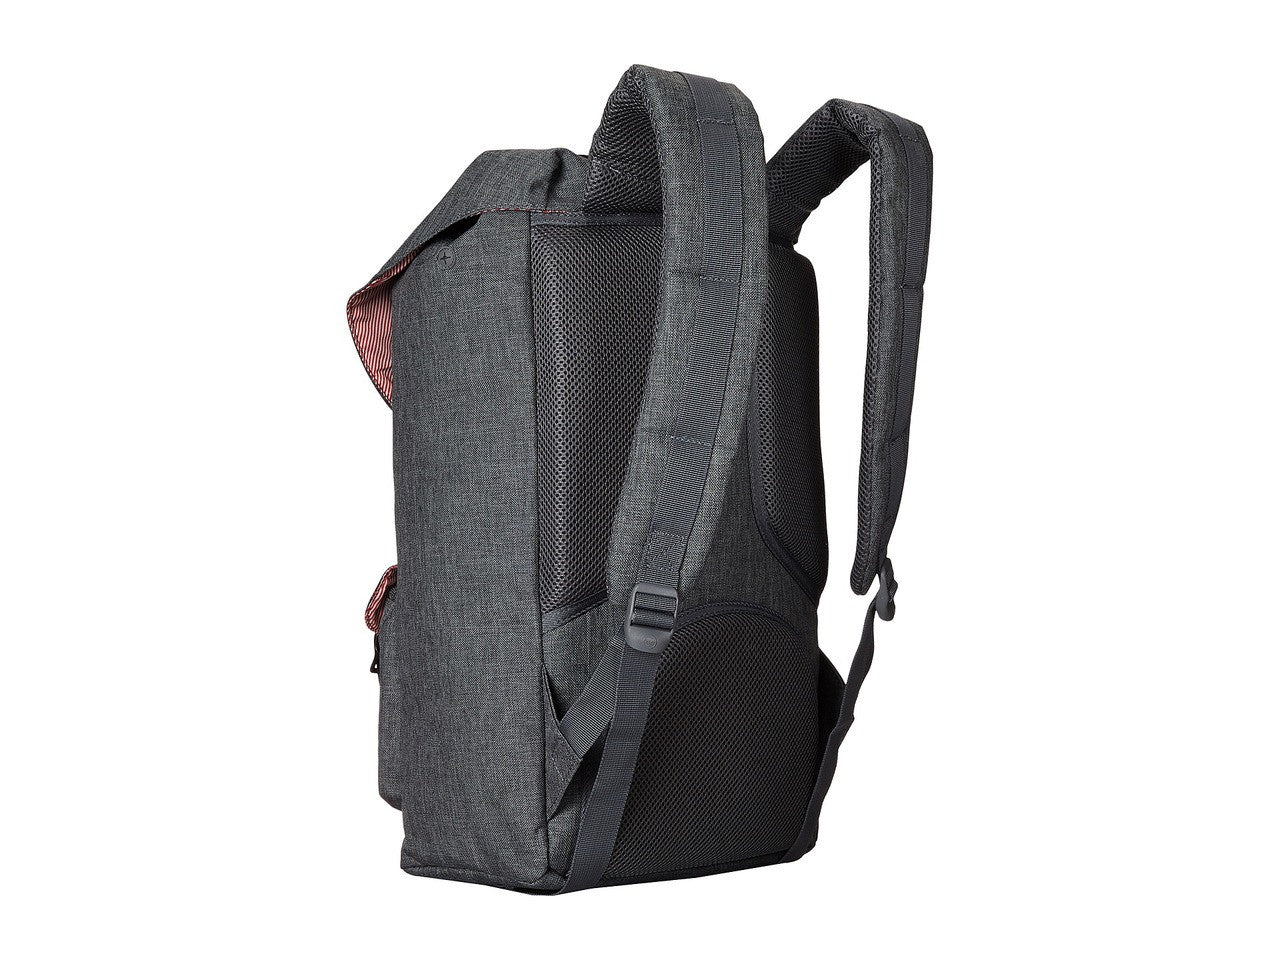 Herschel Supply Co. - Little America Backpack, Crosshatch Charcoal - The Giant Peach